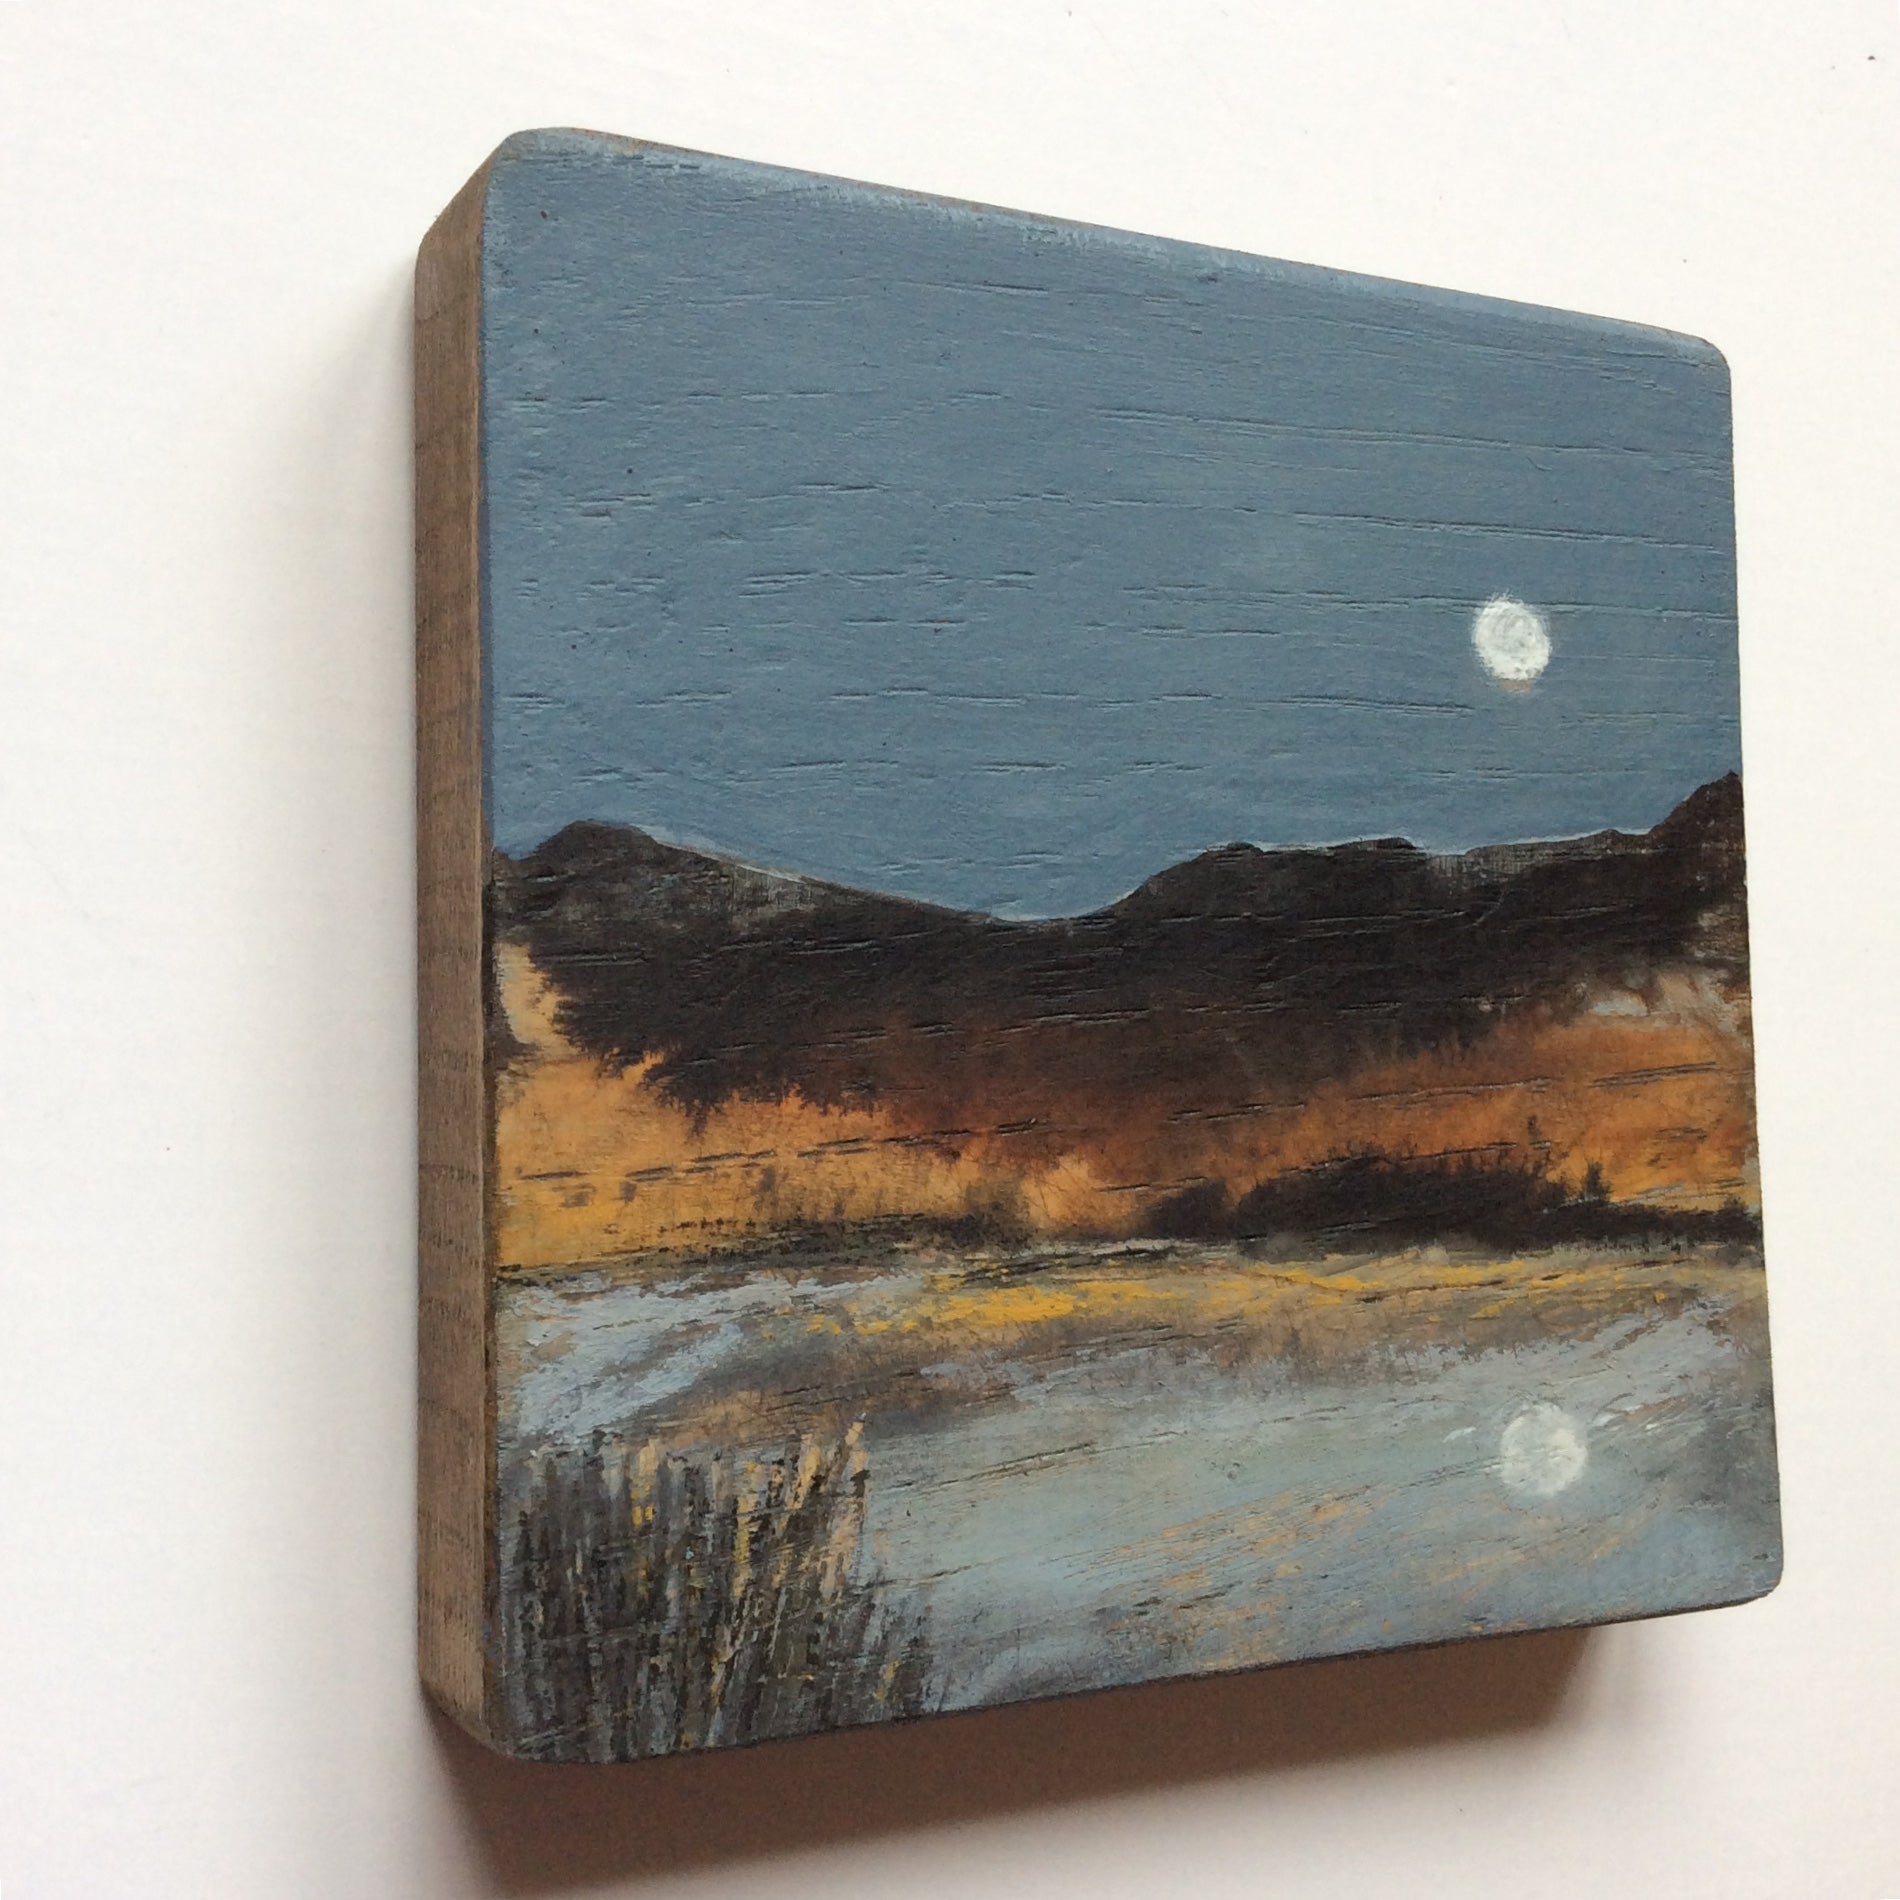 Mini Mixed Media Art on wood By Louise O'Hara - "An evening stroll along the river"